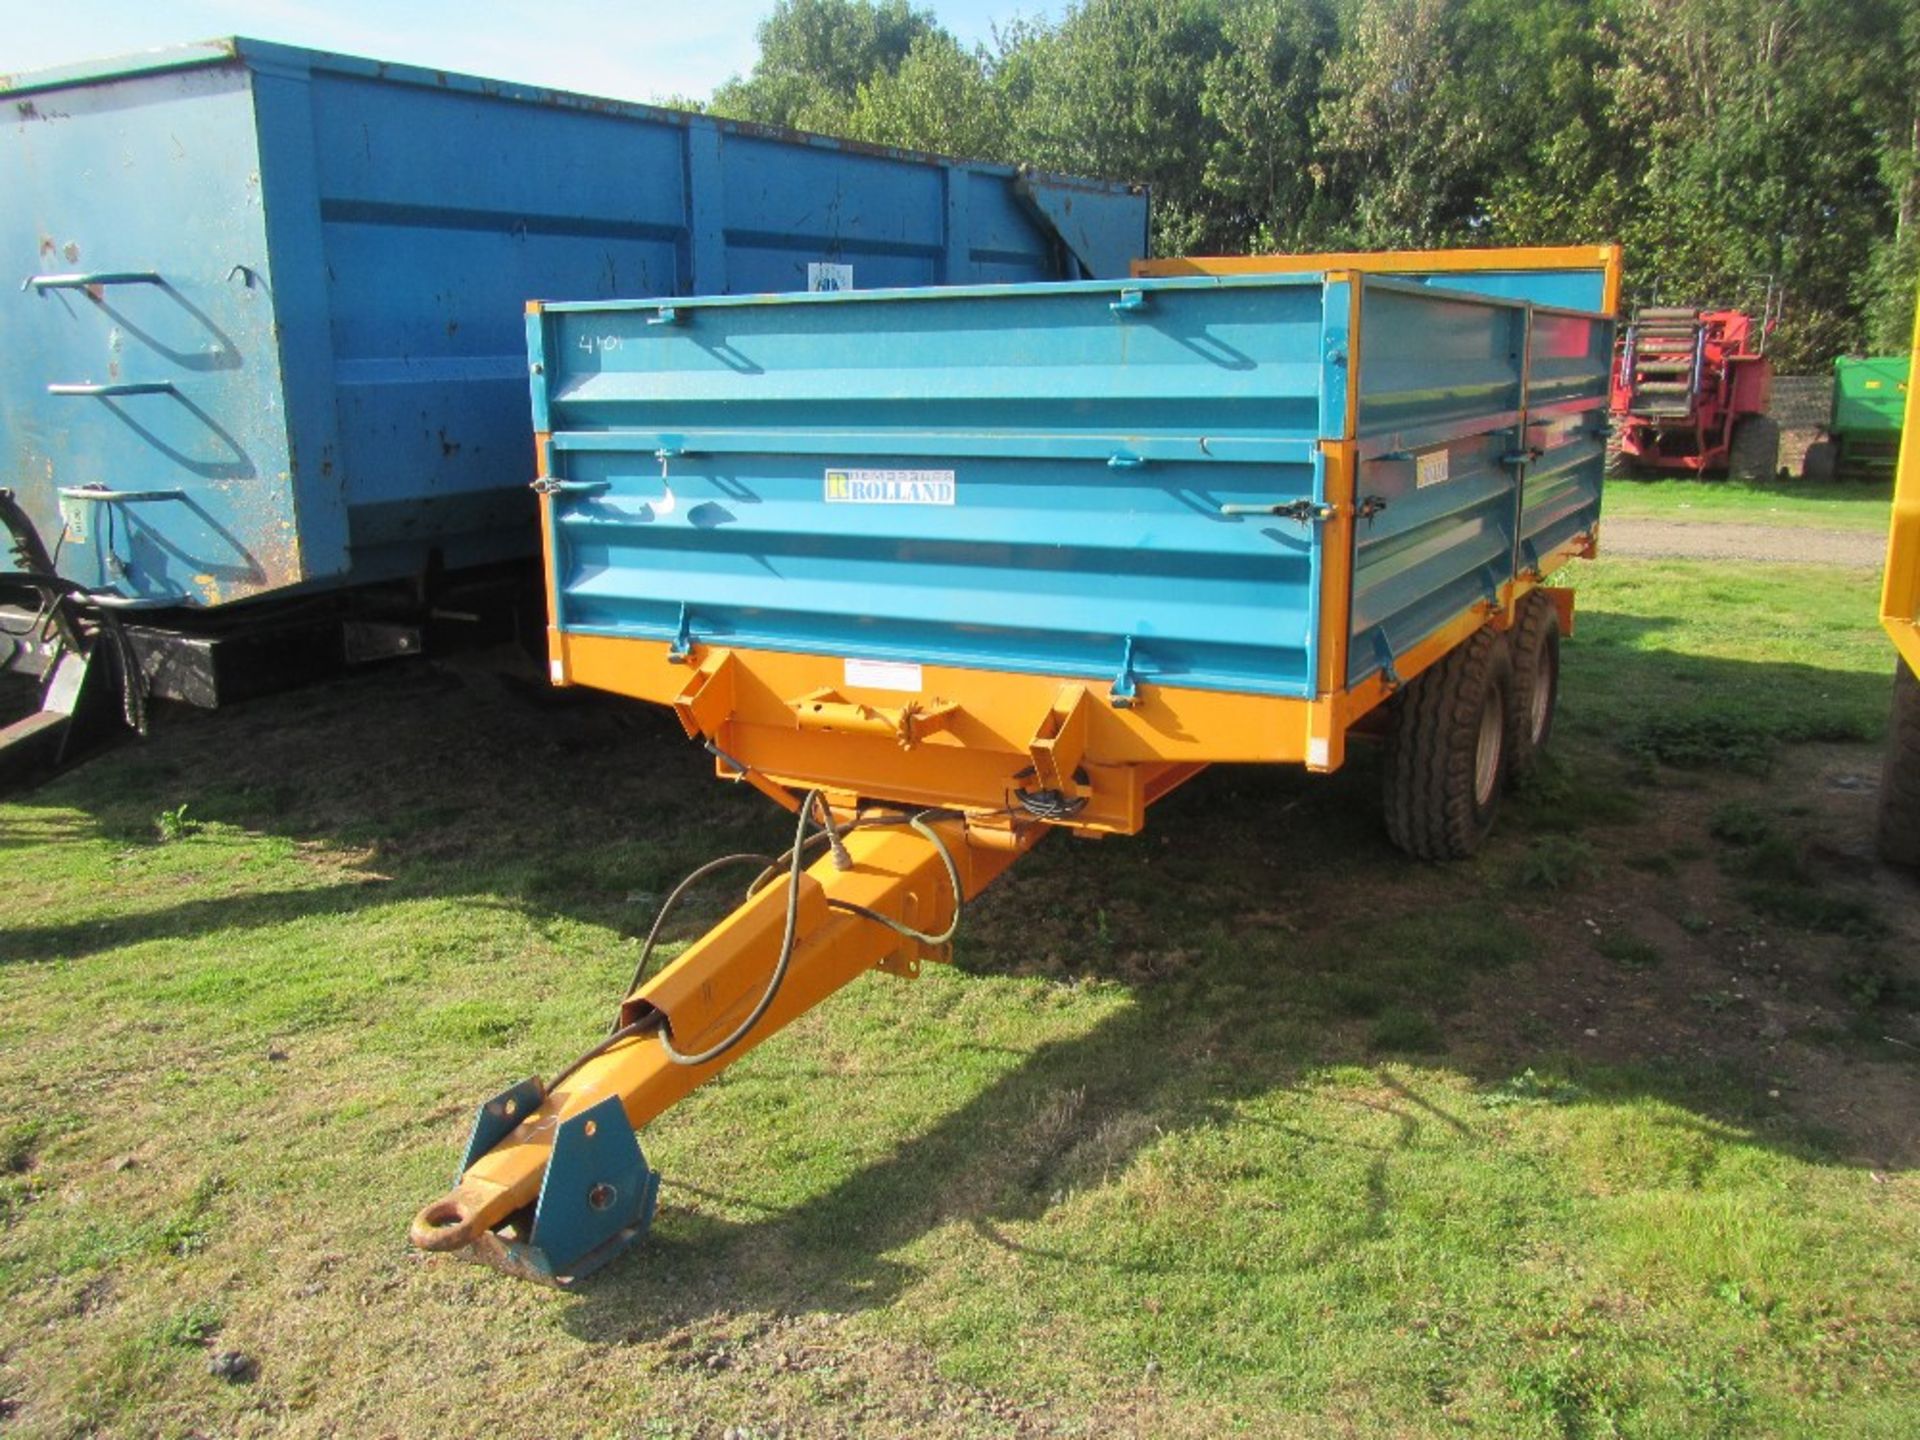 Rolland BH80 Tandem Axle Dropside Tipping Trailer. Ser. No. 8943 - Image 6 of 7